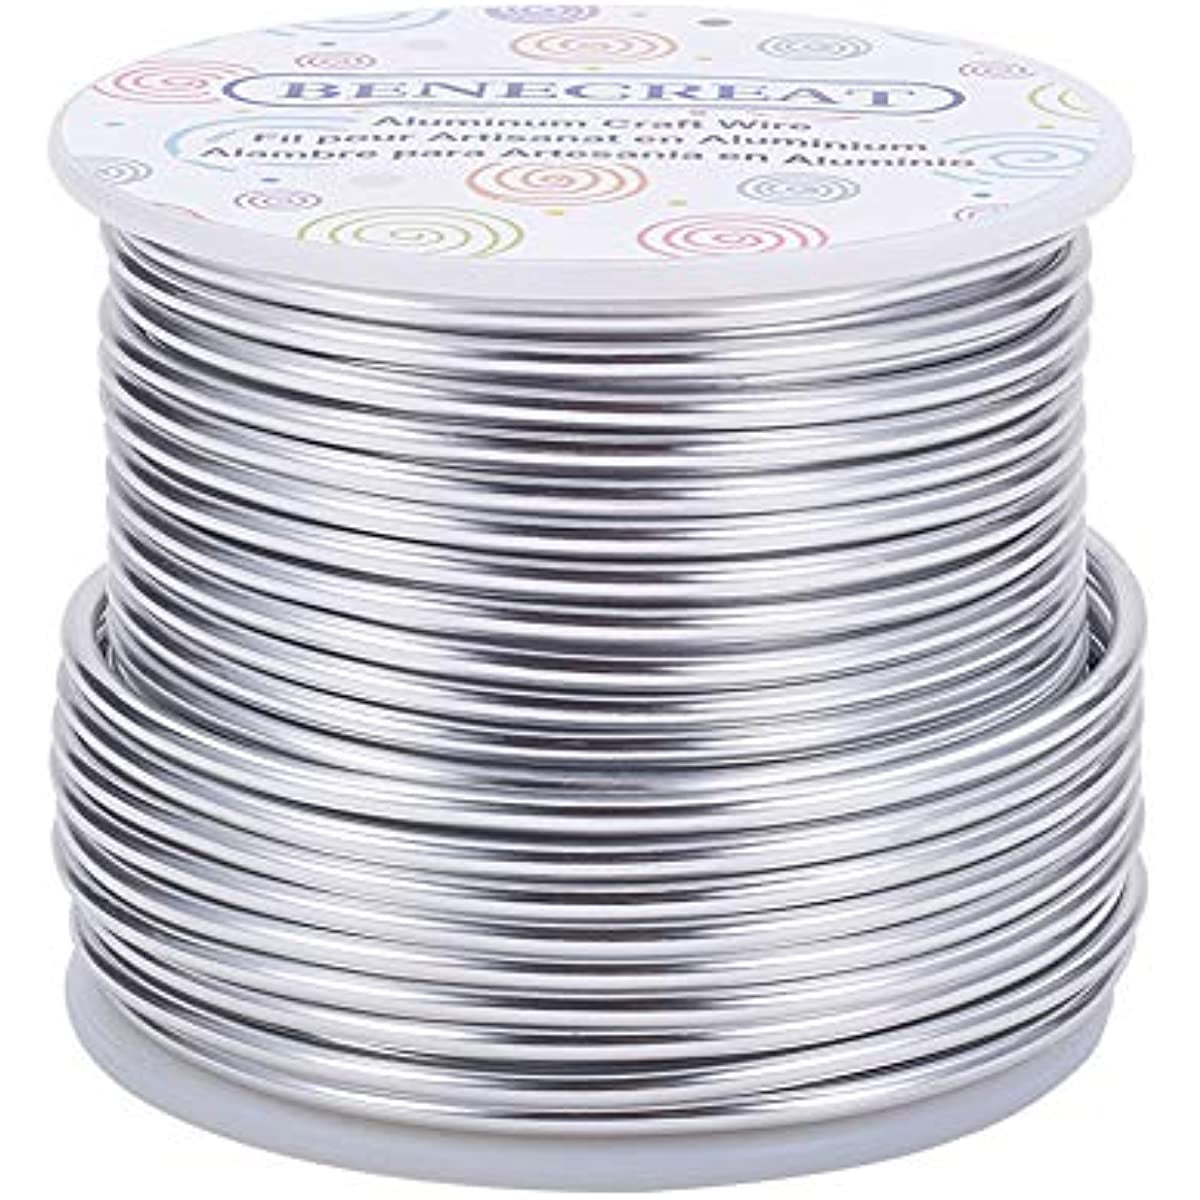 10/20M Silver Aluminum Craft Wire Versatile Bendable Metal Craft Wire For  Making Dolls Skeleton DIY Jewelry Crafts 1/1.5/2mm